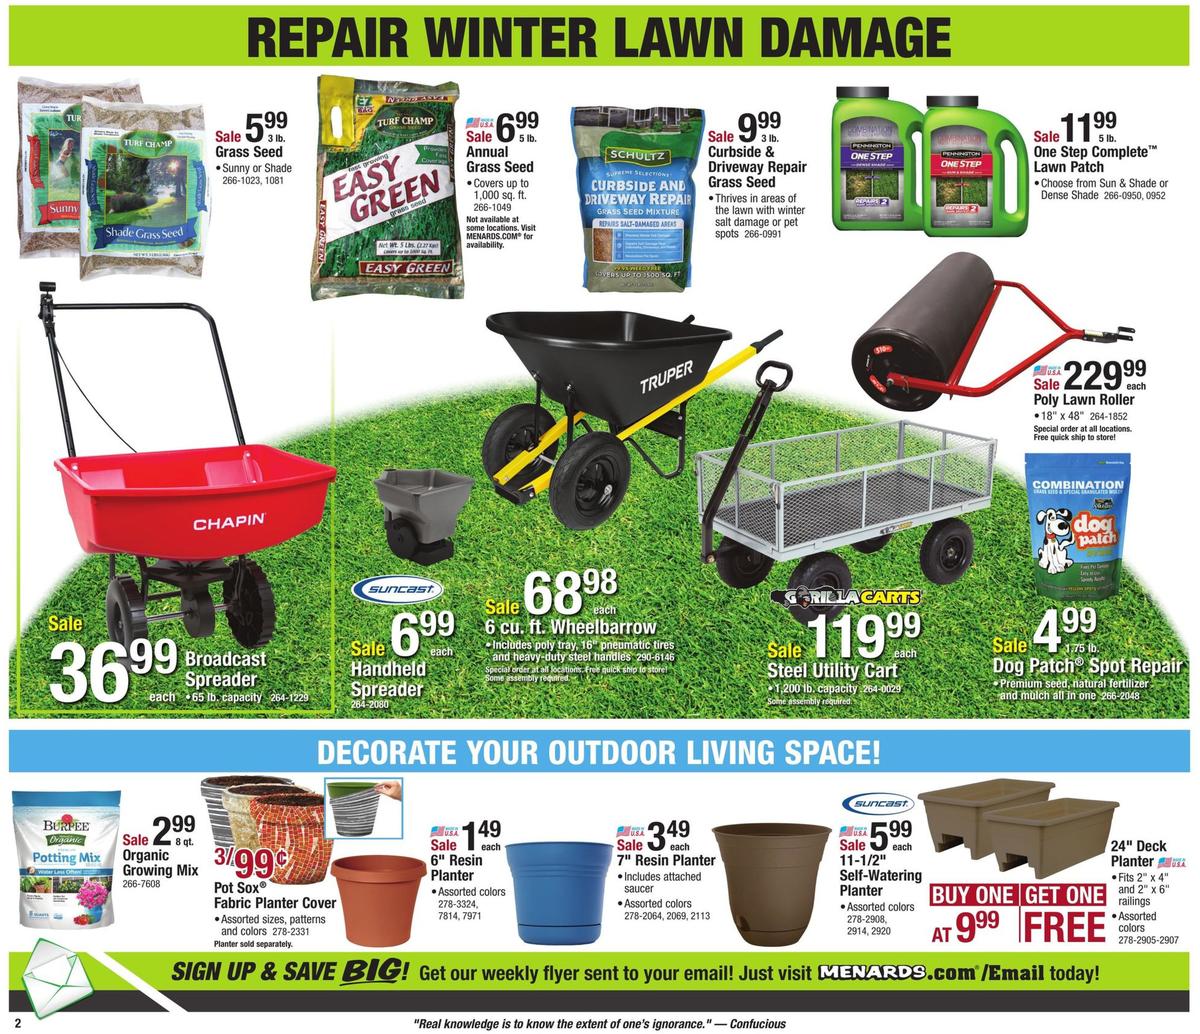 Menards Weekly Ad from March 8